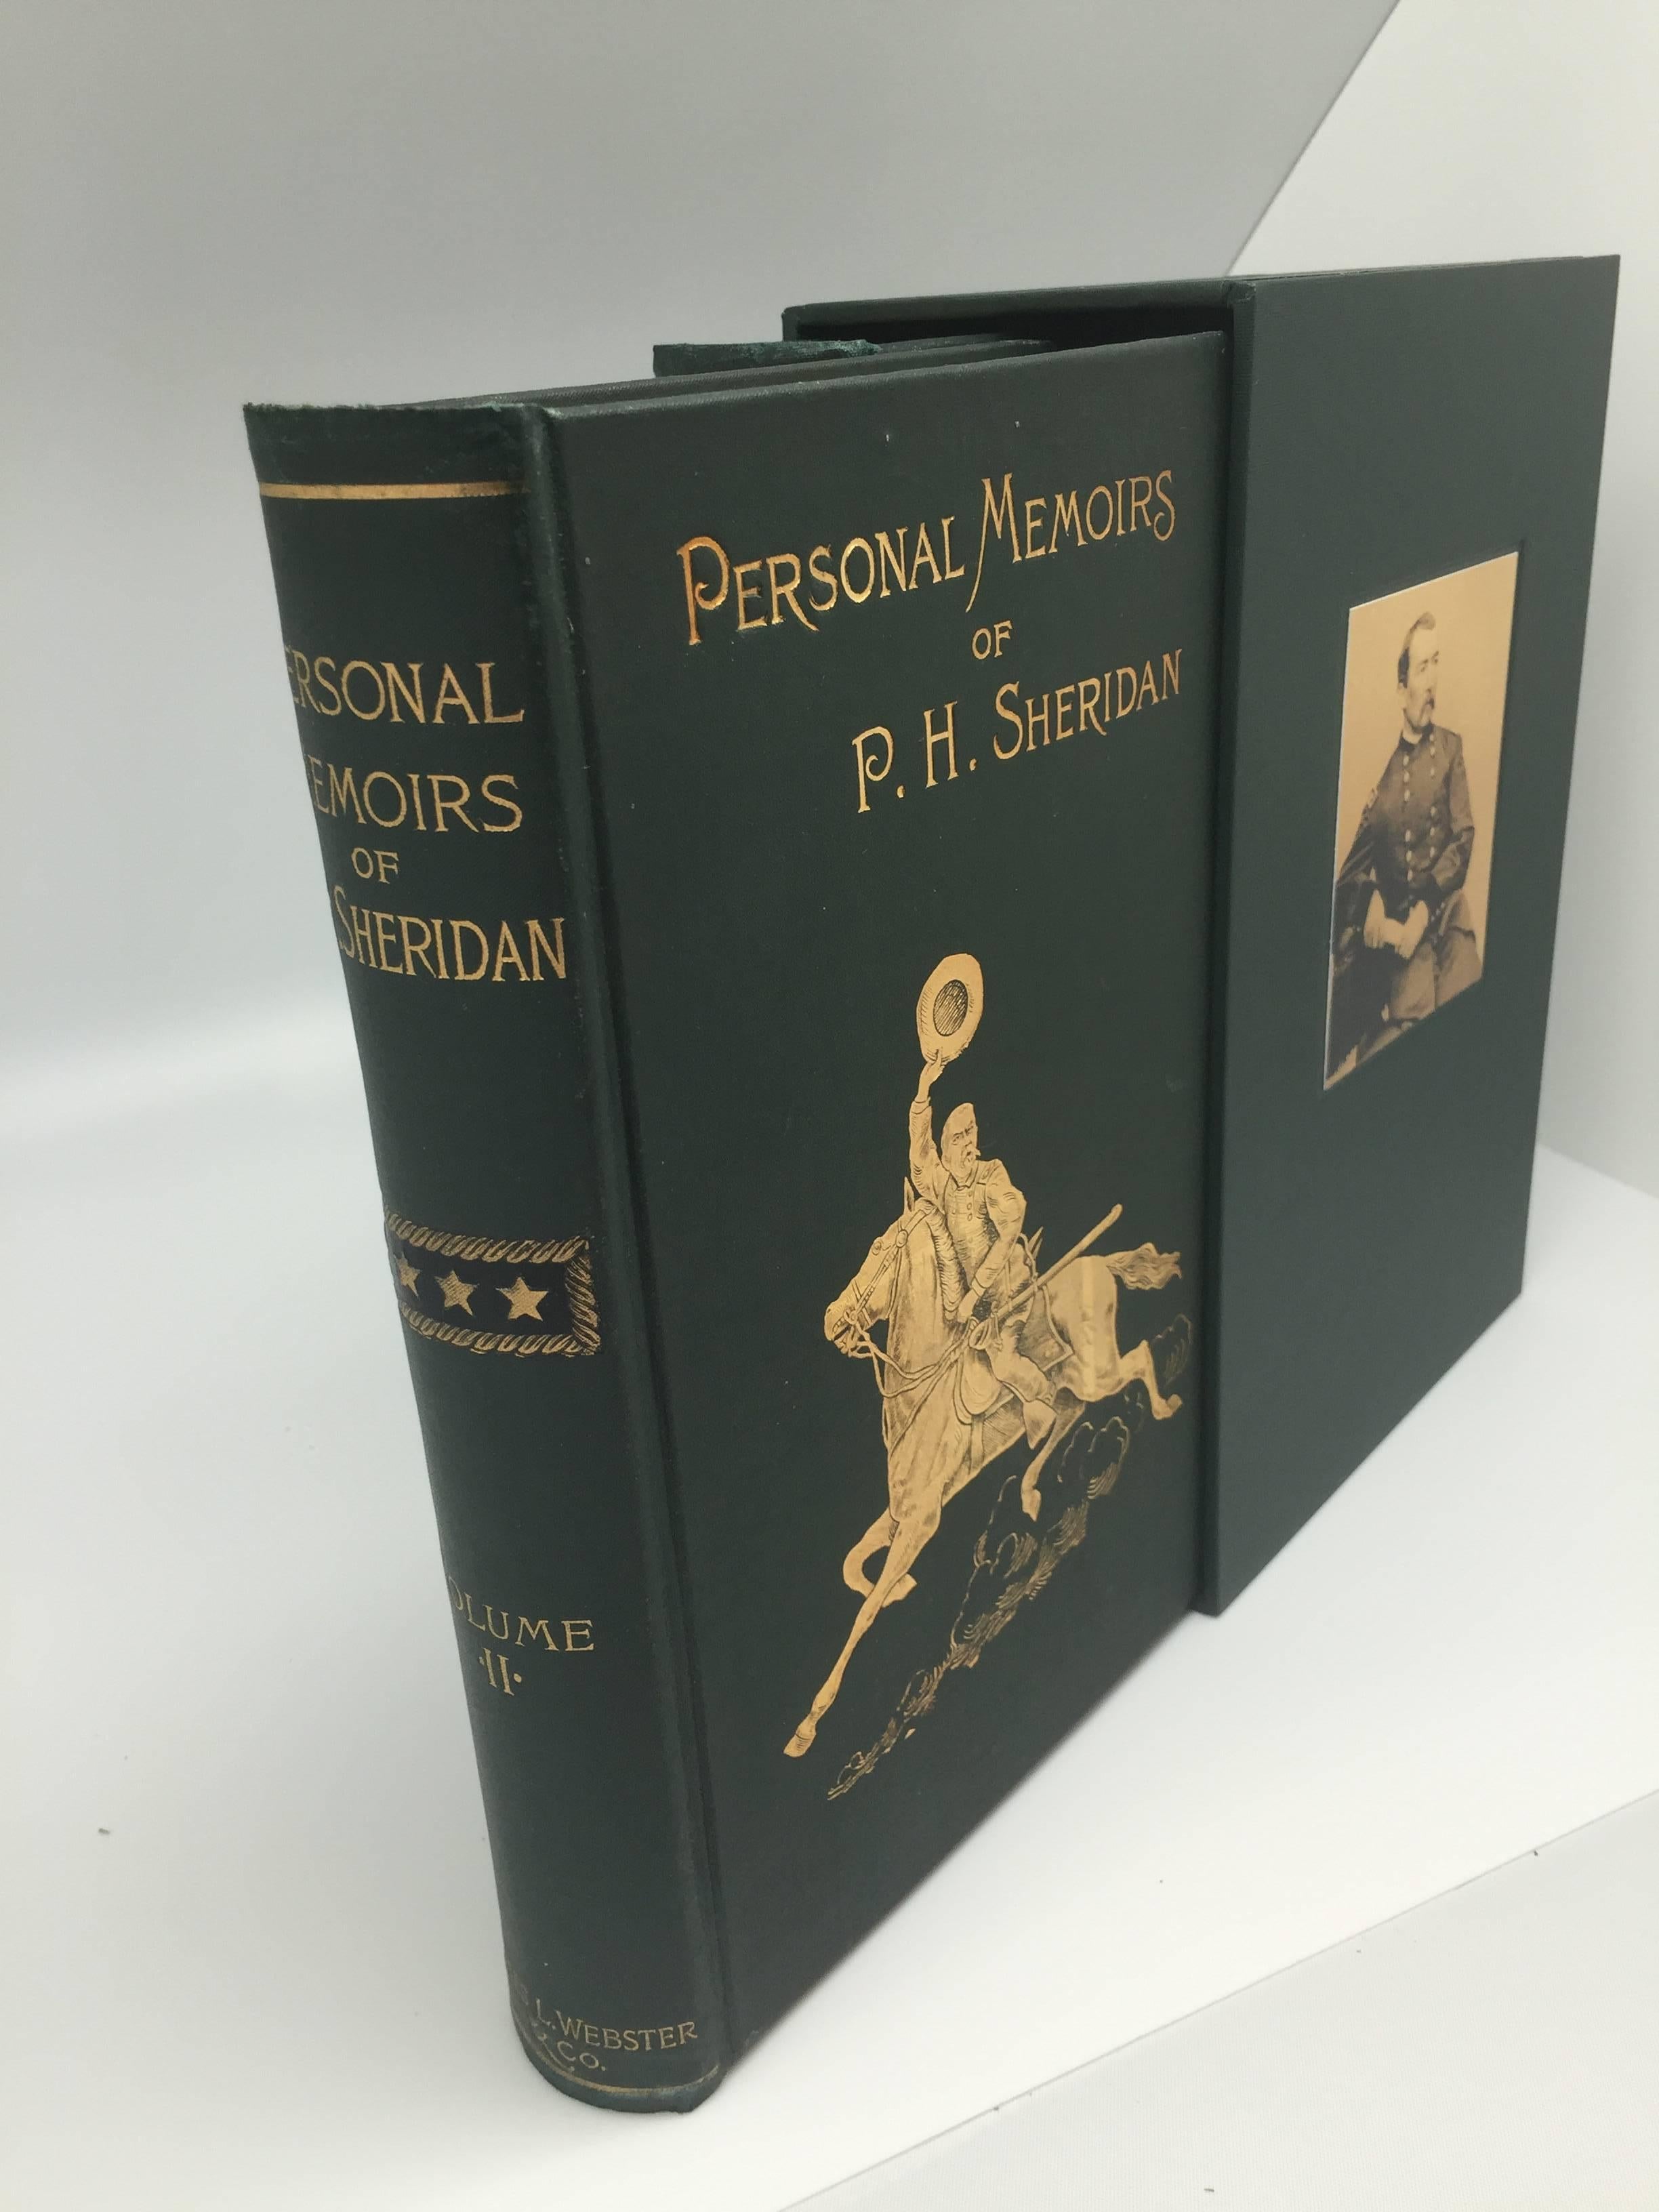 Sheridan, Philip Henry. Personal Memoirs of P.H. Sheridan, General United States Army. New York: Charles L. Webster & Company, 1888. First Edition. Bound in green cloth and gilt embossed boards. Housed in custom built archival slipcase.

This first